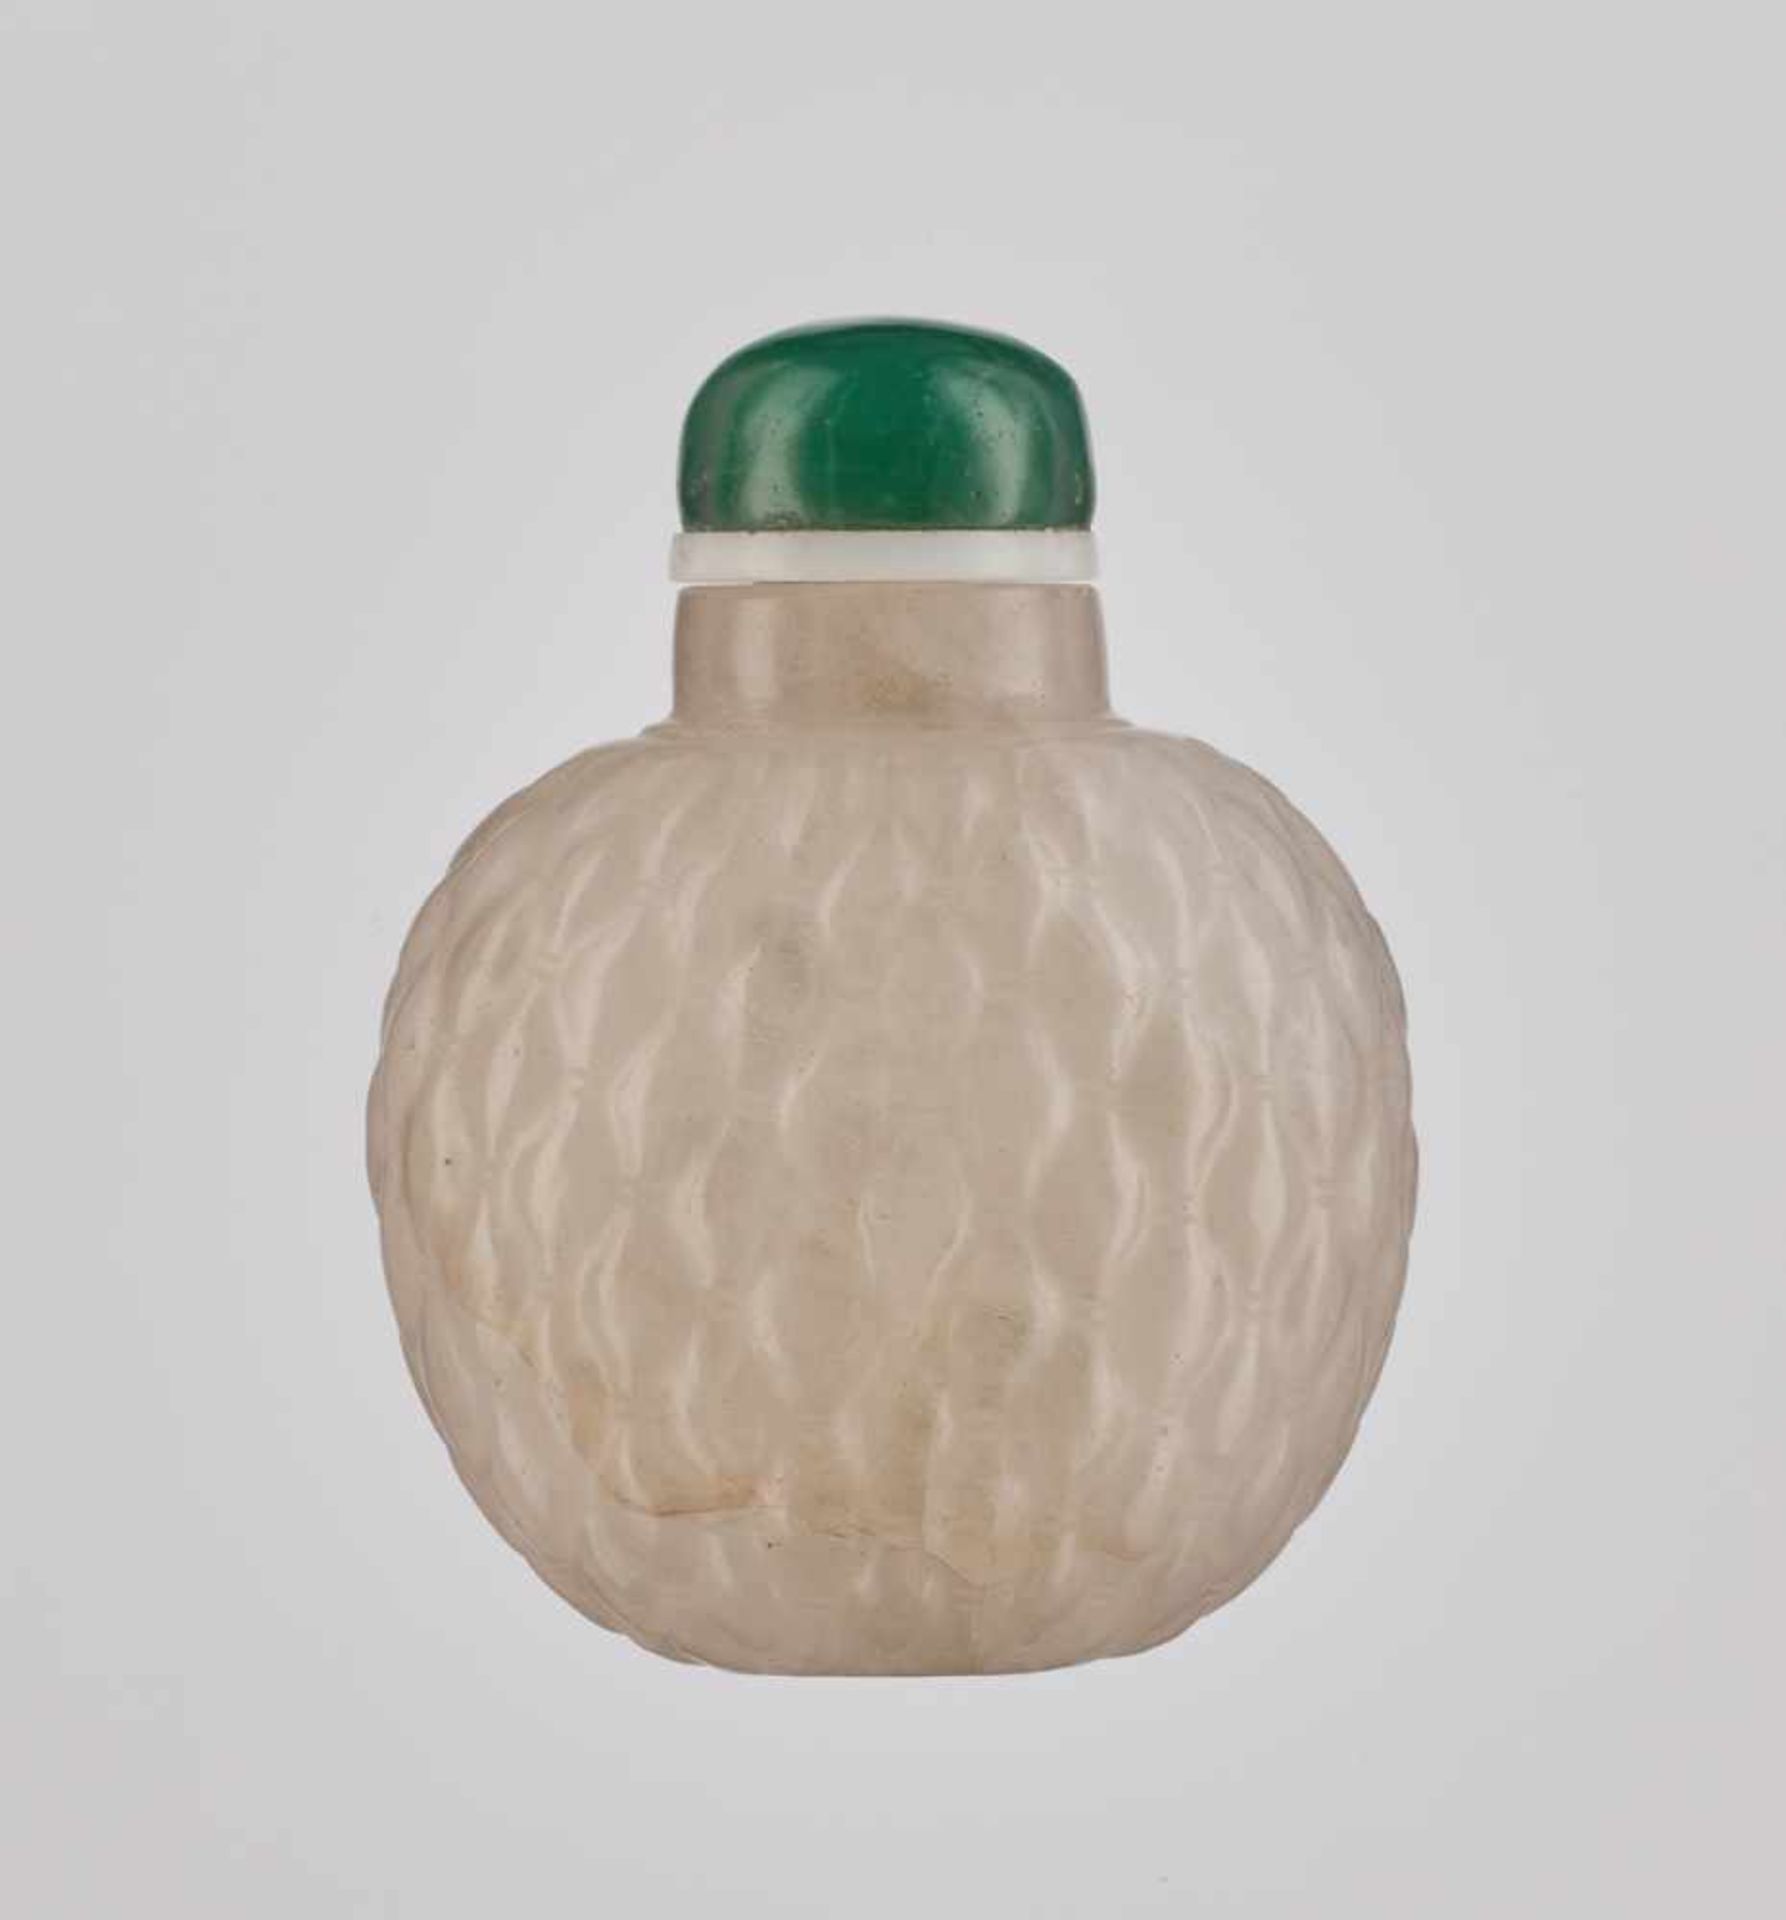 A CARVED CRYSTAL 'BASKETWEAVE' SNUFF BOTTLE, QING DYNASTY Translucent rock crystal, with several